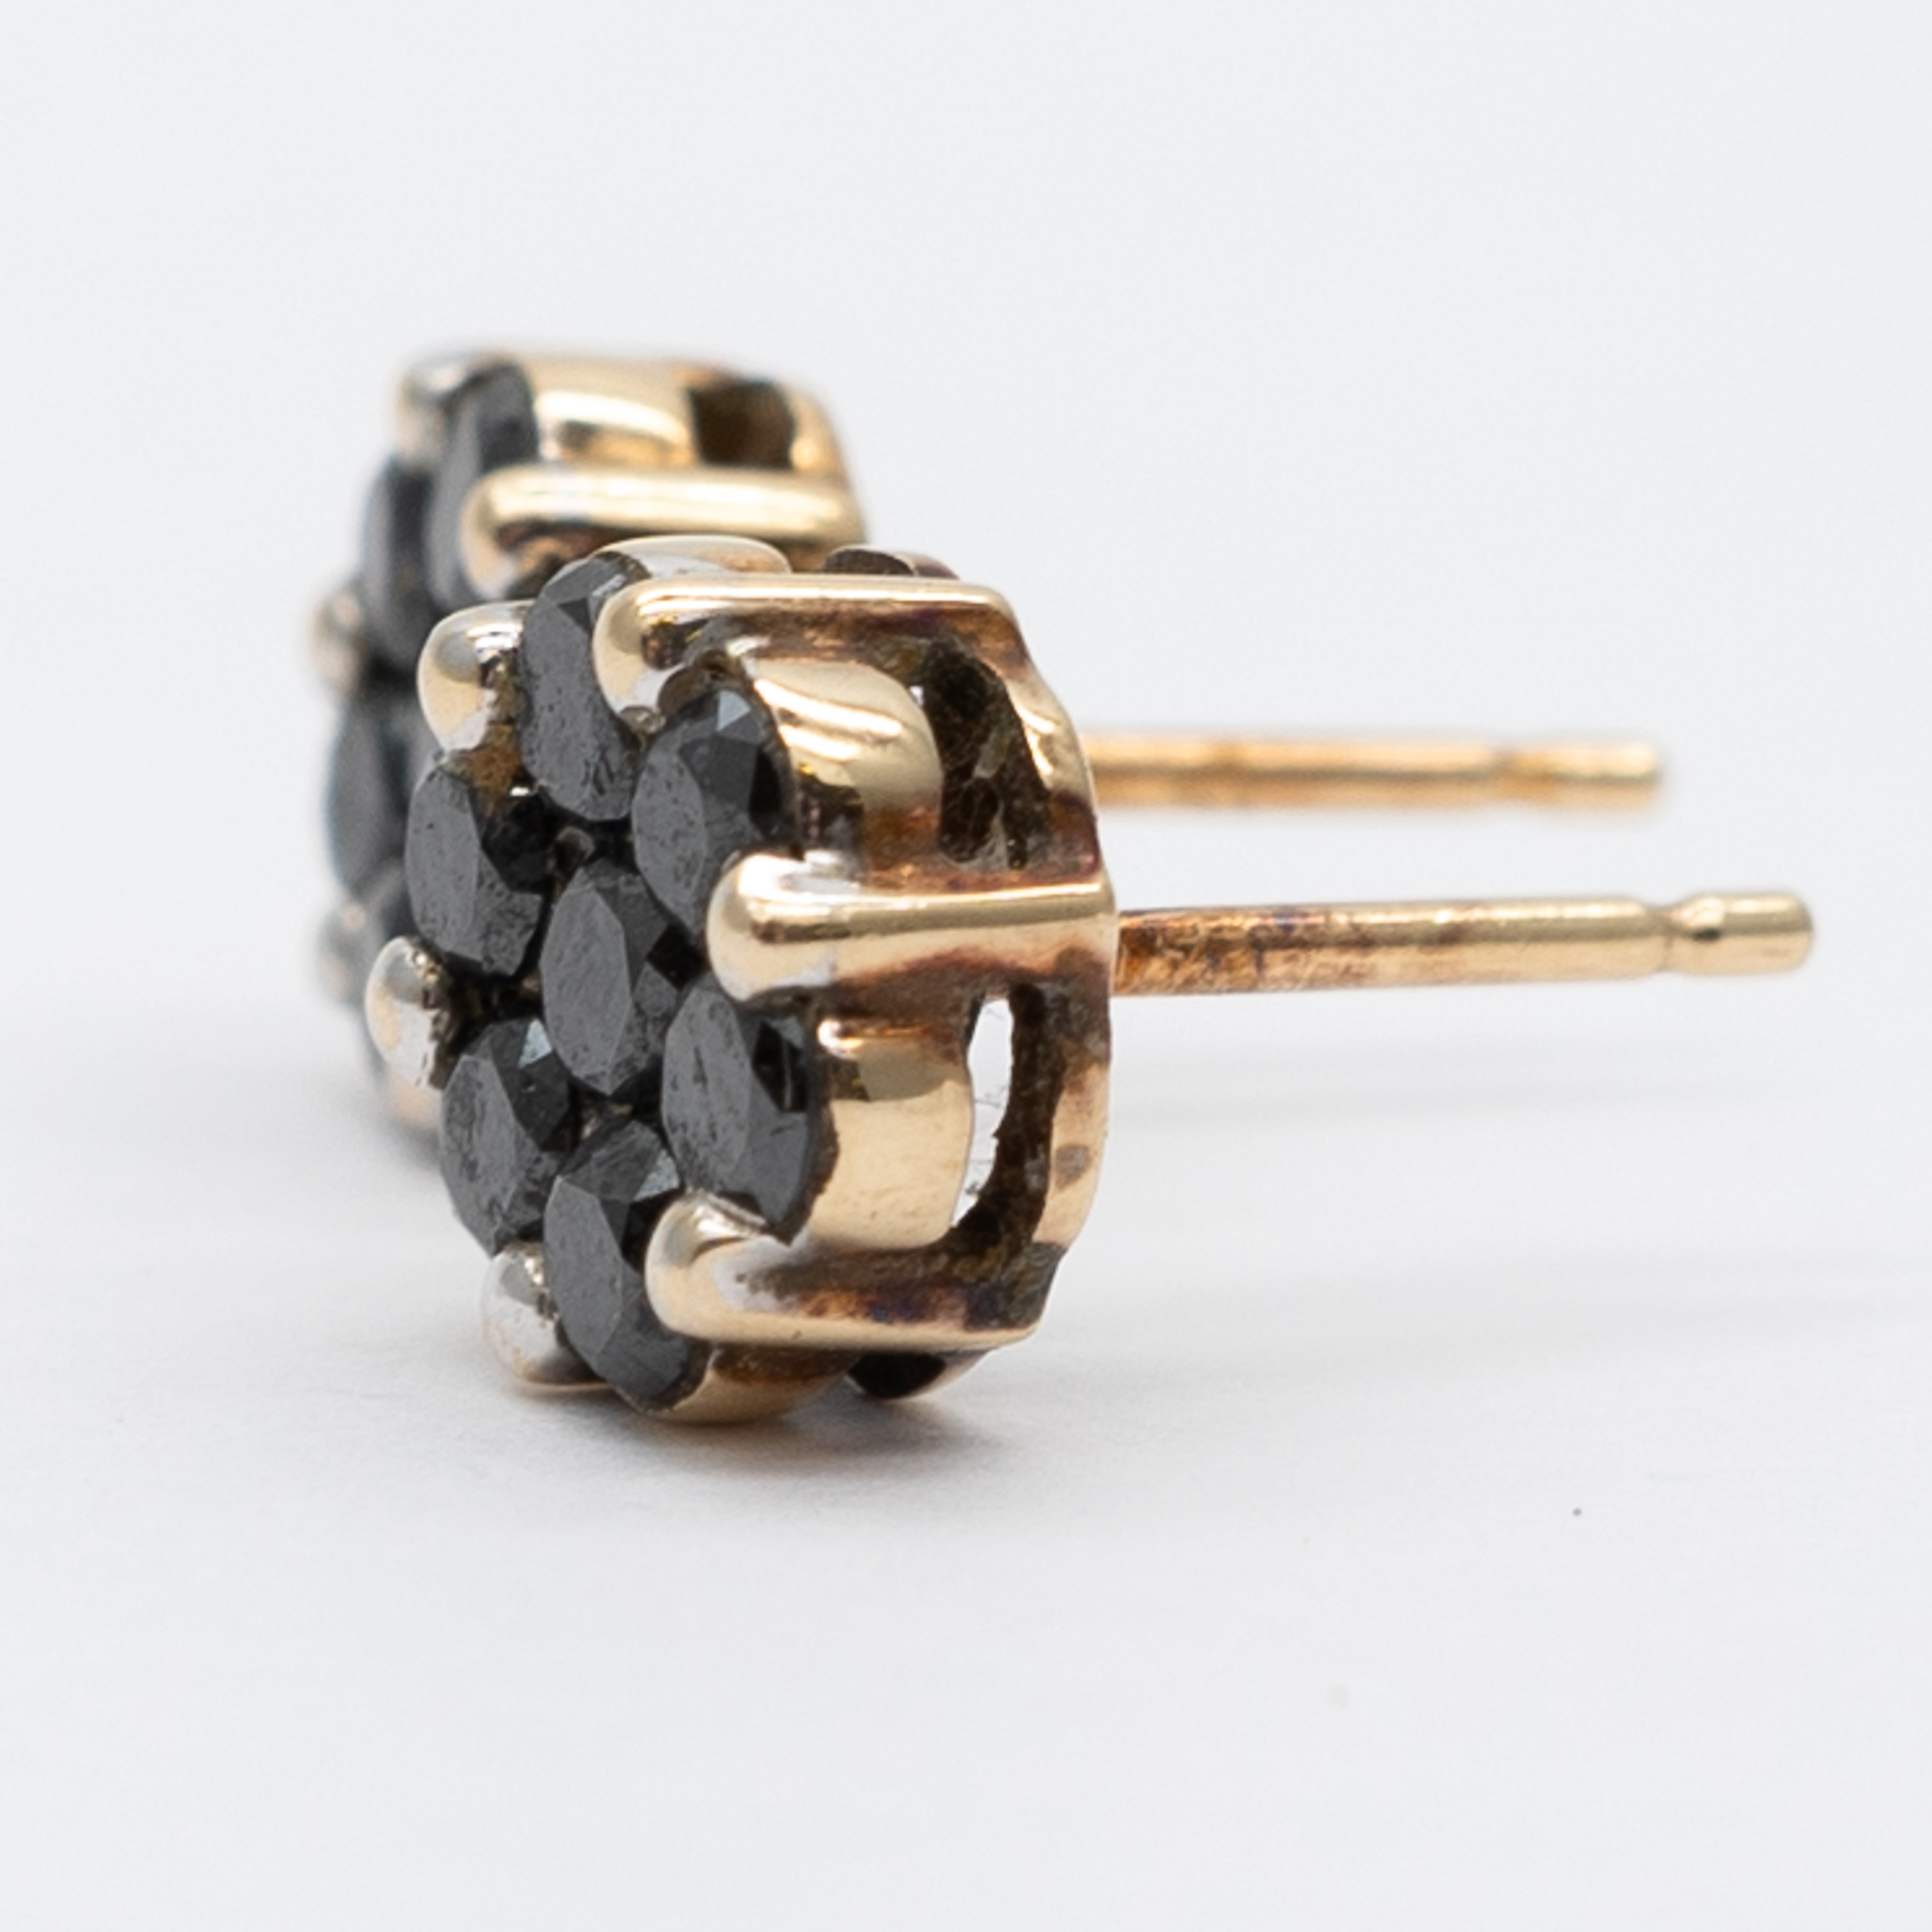 A pair of 9ct yellow gold black diamond stud earrings - Image 2 of 4